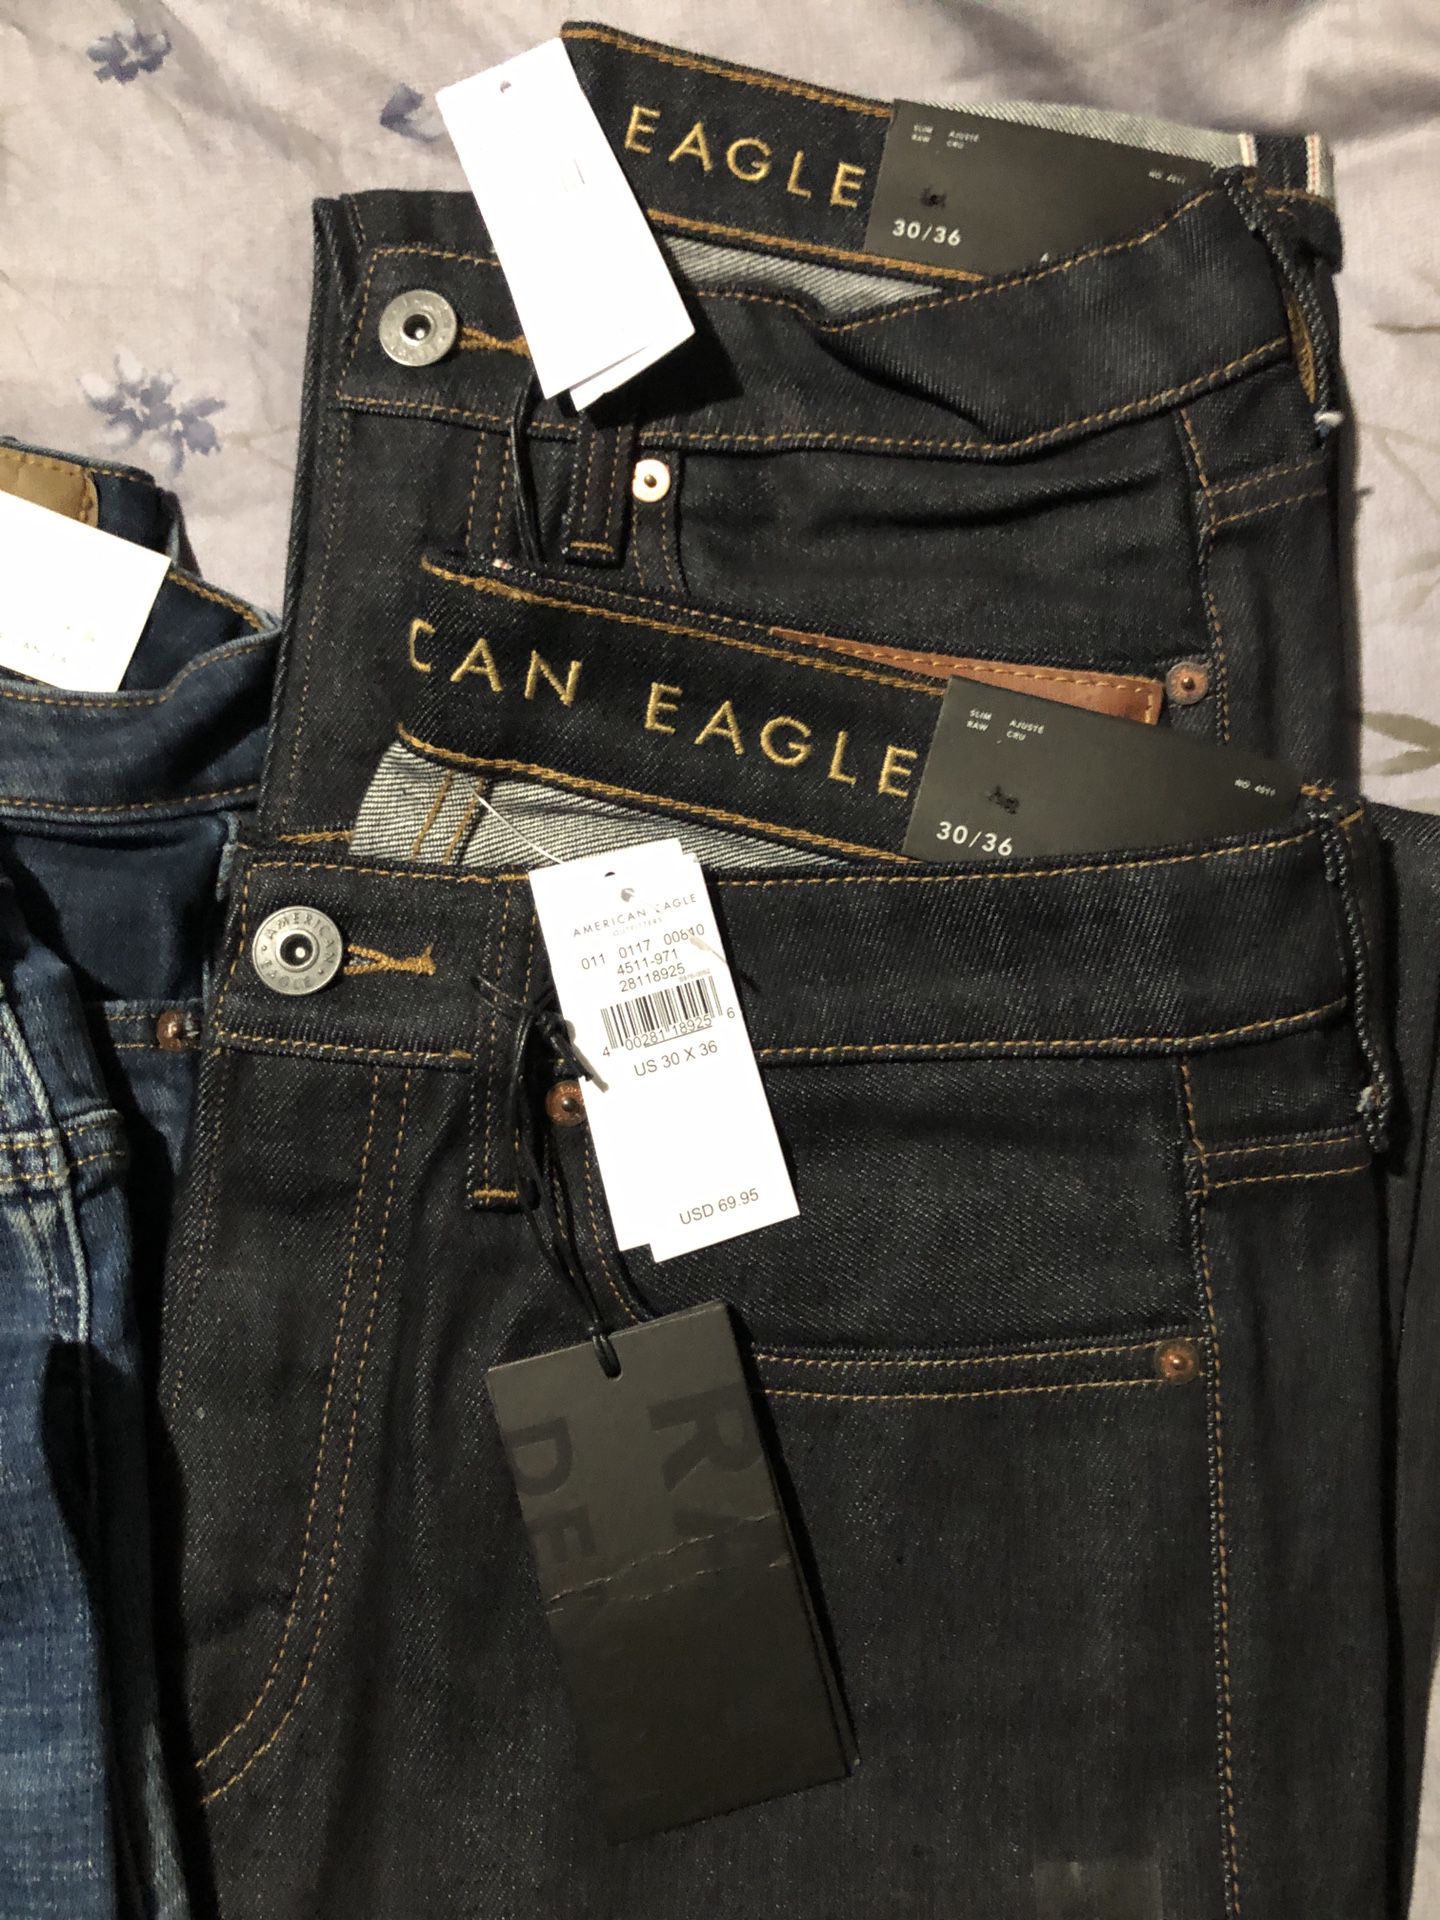 American Eagle Jeans New With Tags 30X36 for Sale in Houston, TX - OfferUp